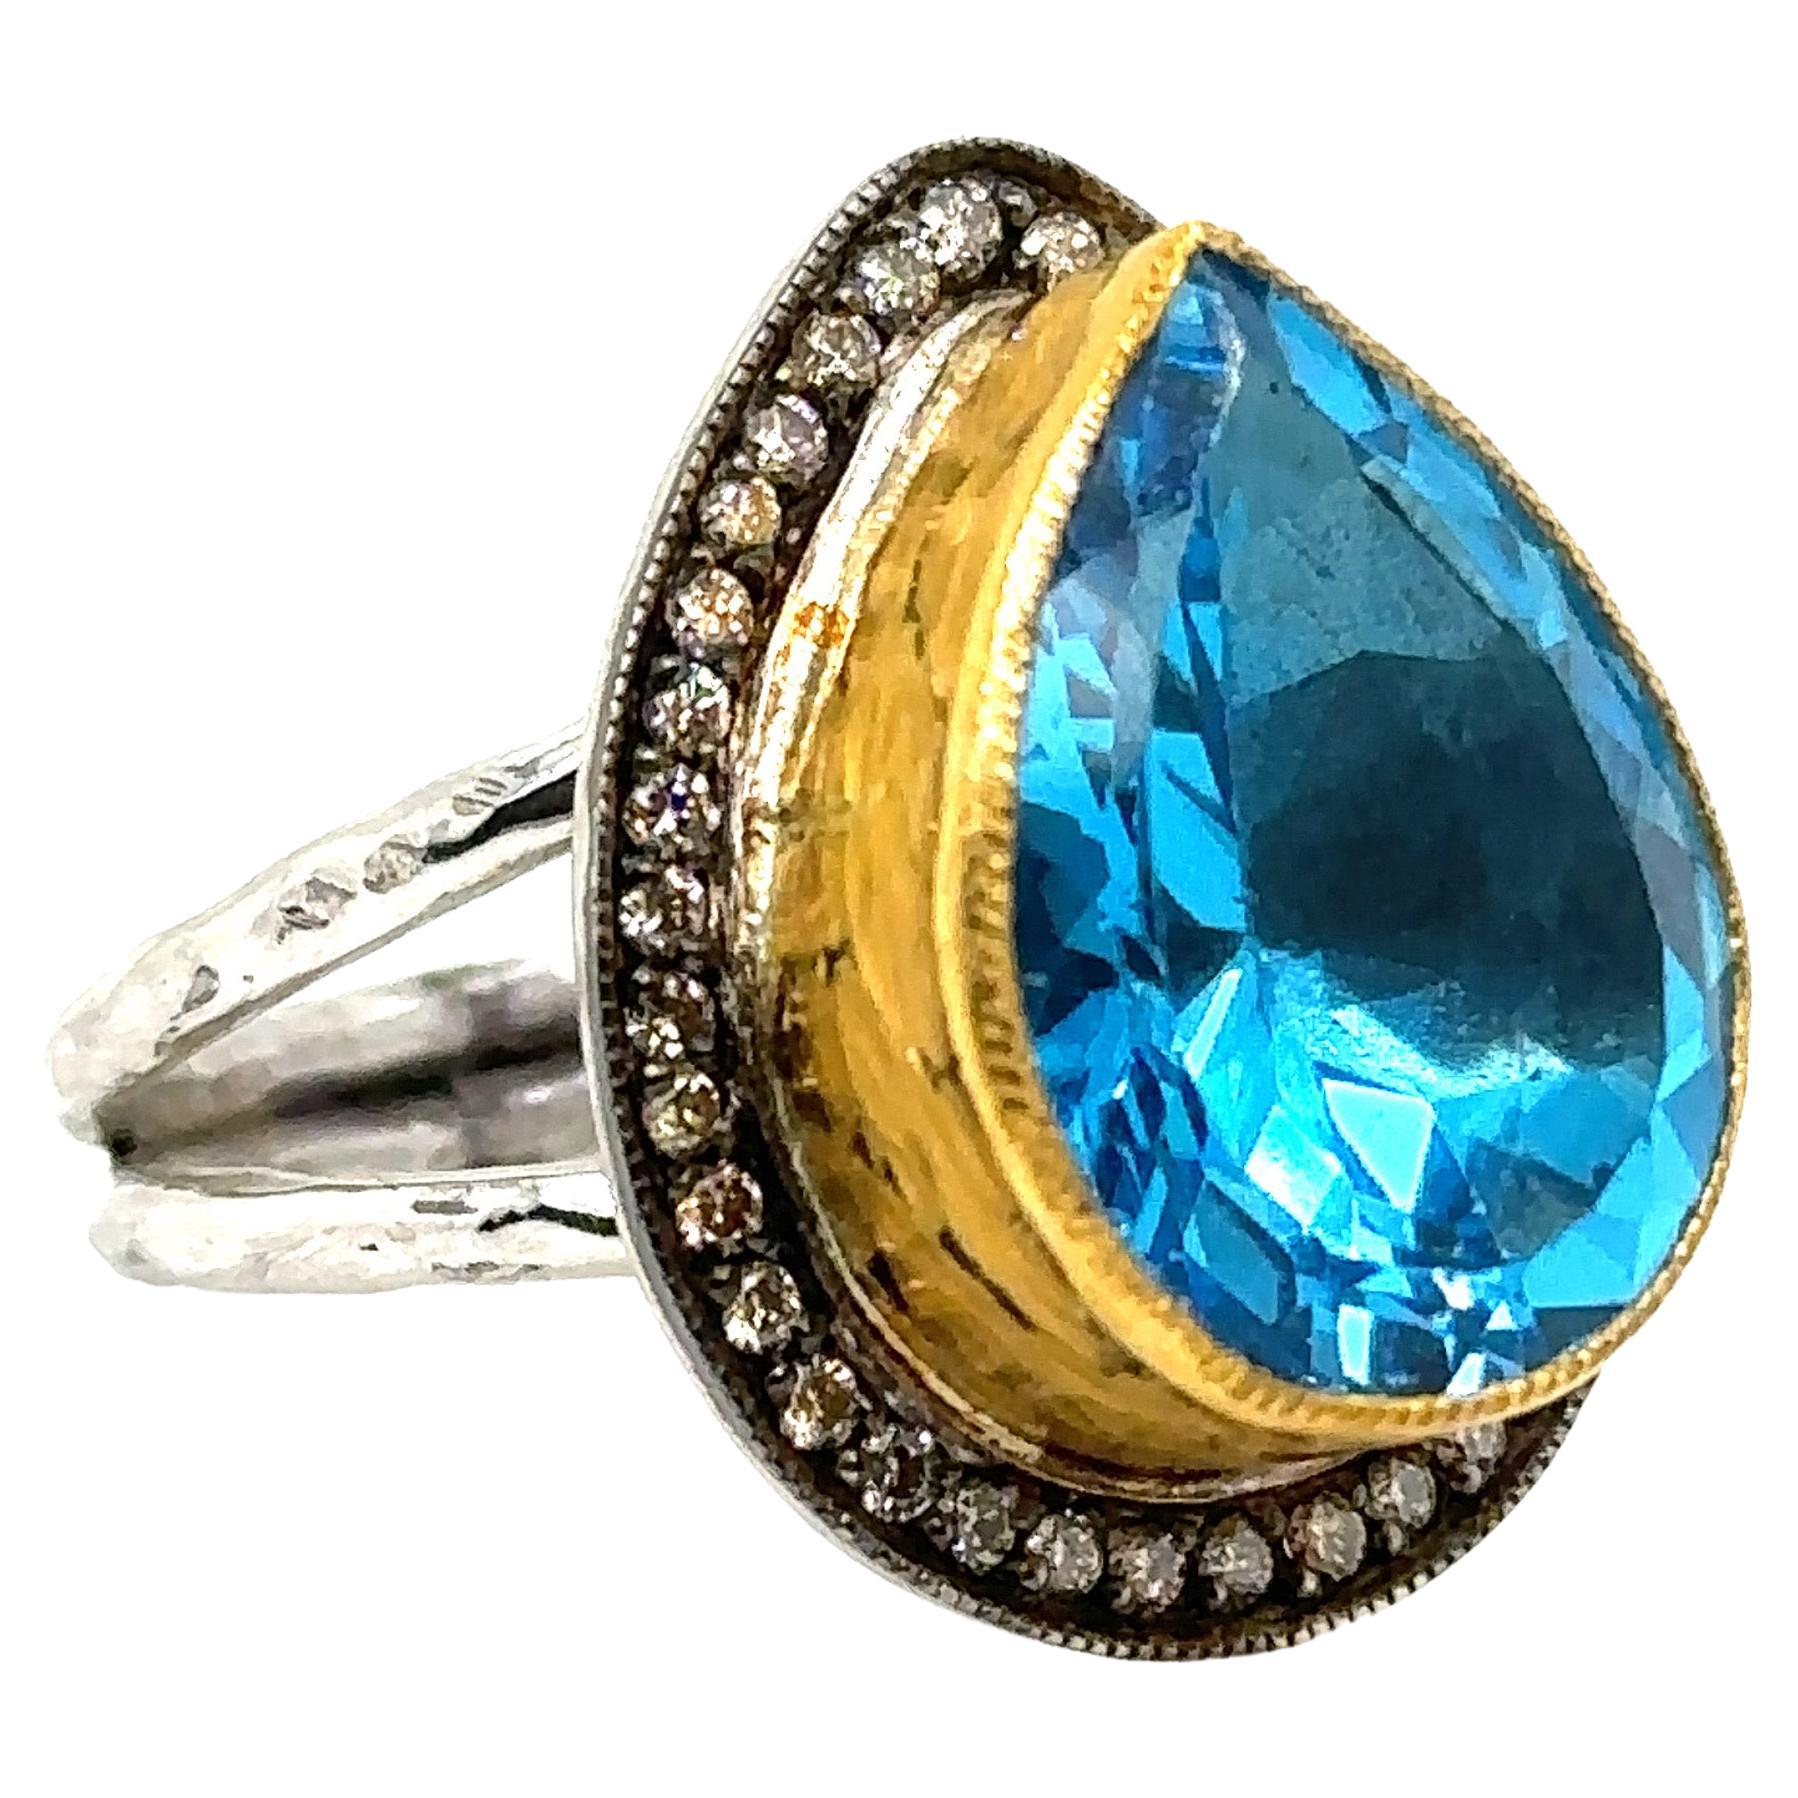 JAS-22-2306 - 24K GOLD/STERLING SILVER RING 0.40Ct CHAMPAGNE DIAS.  